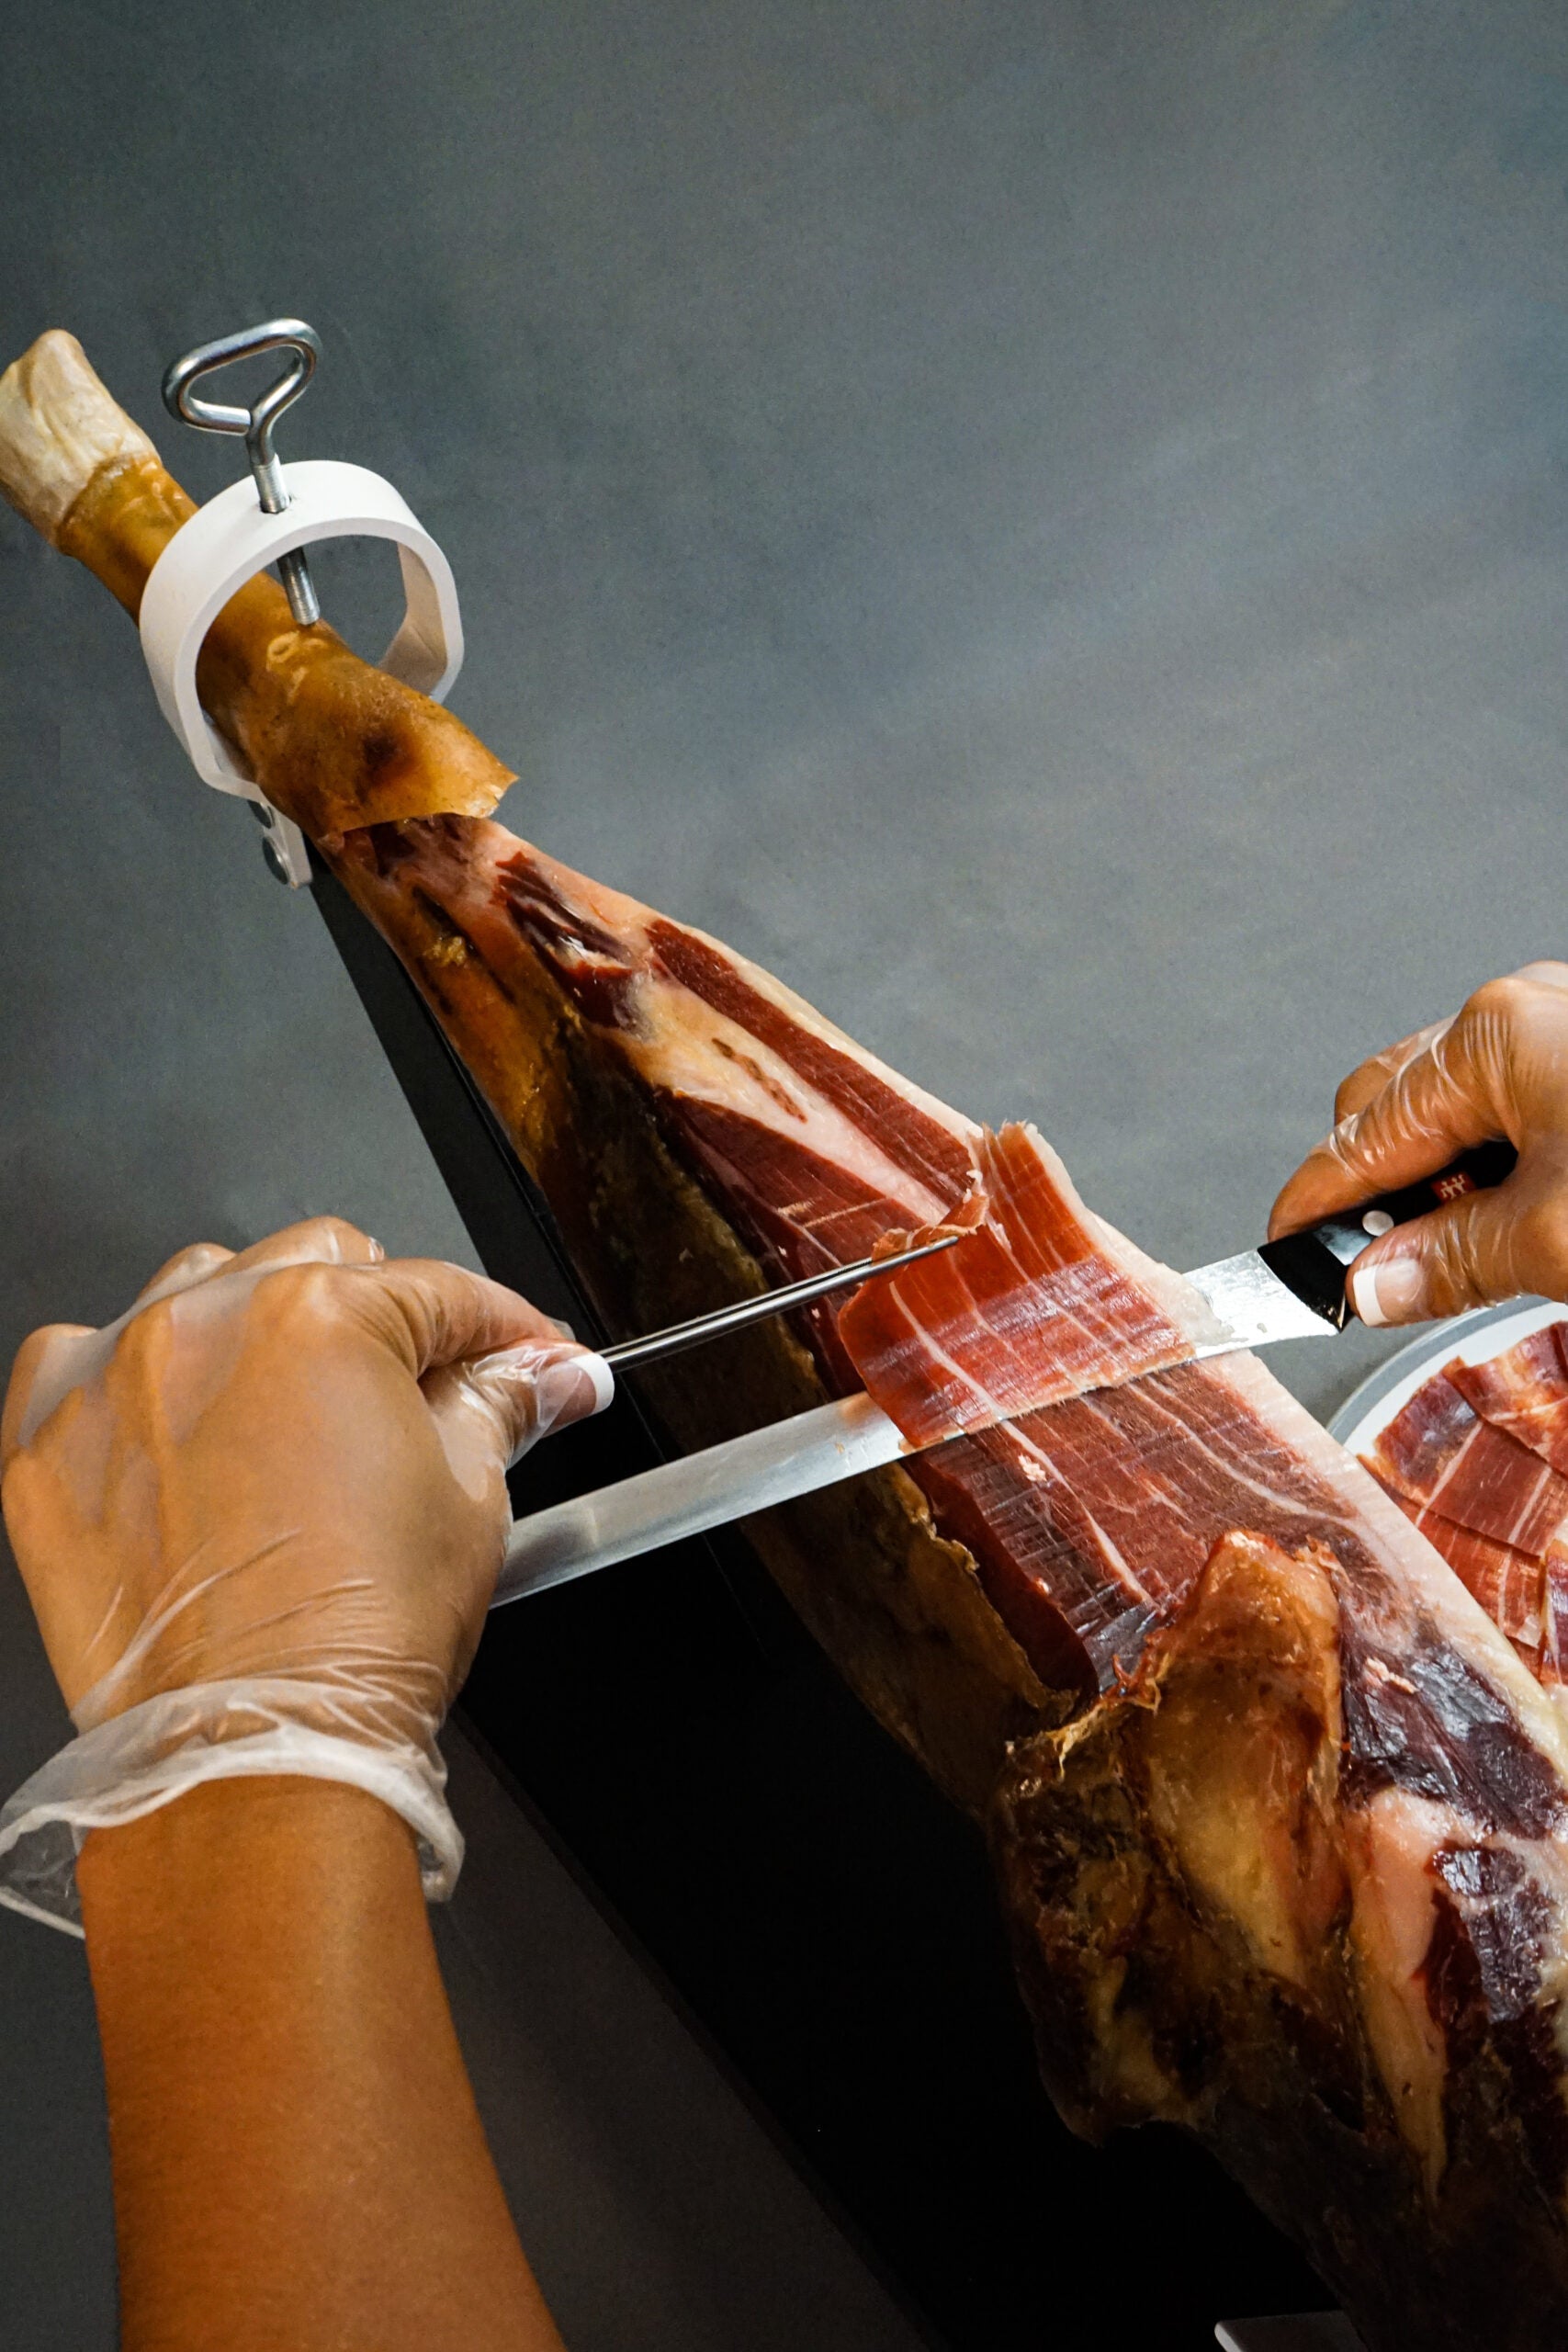 Iberico Ham (Shoulder) All Natural (Exclusive Product) by Fermin